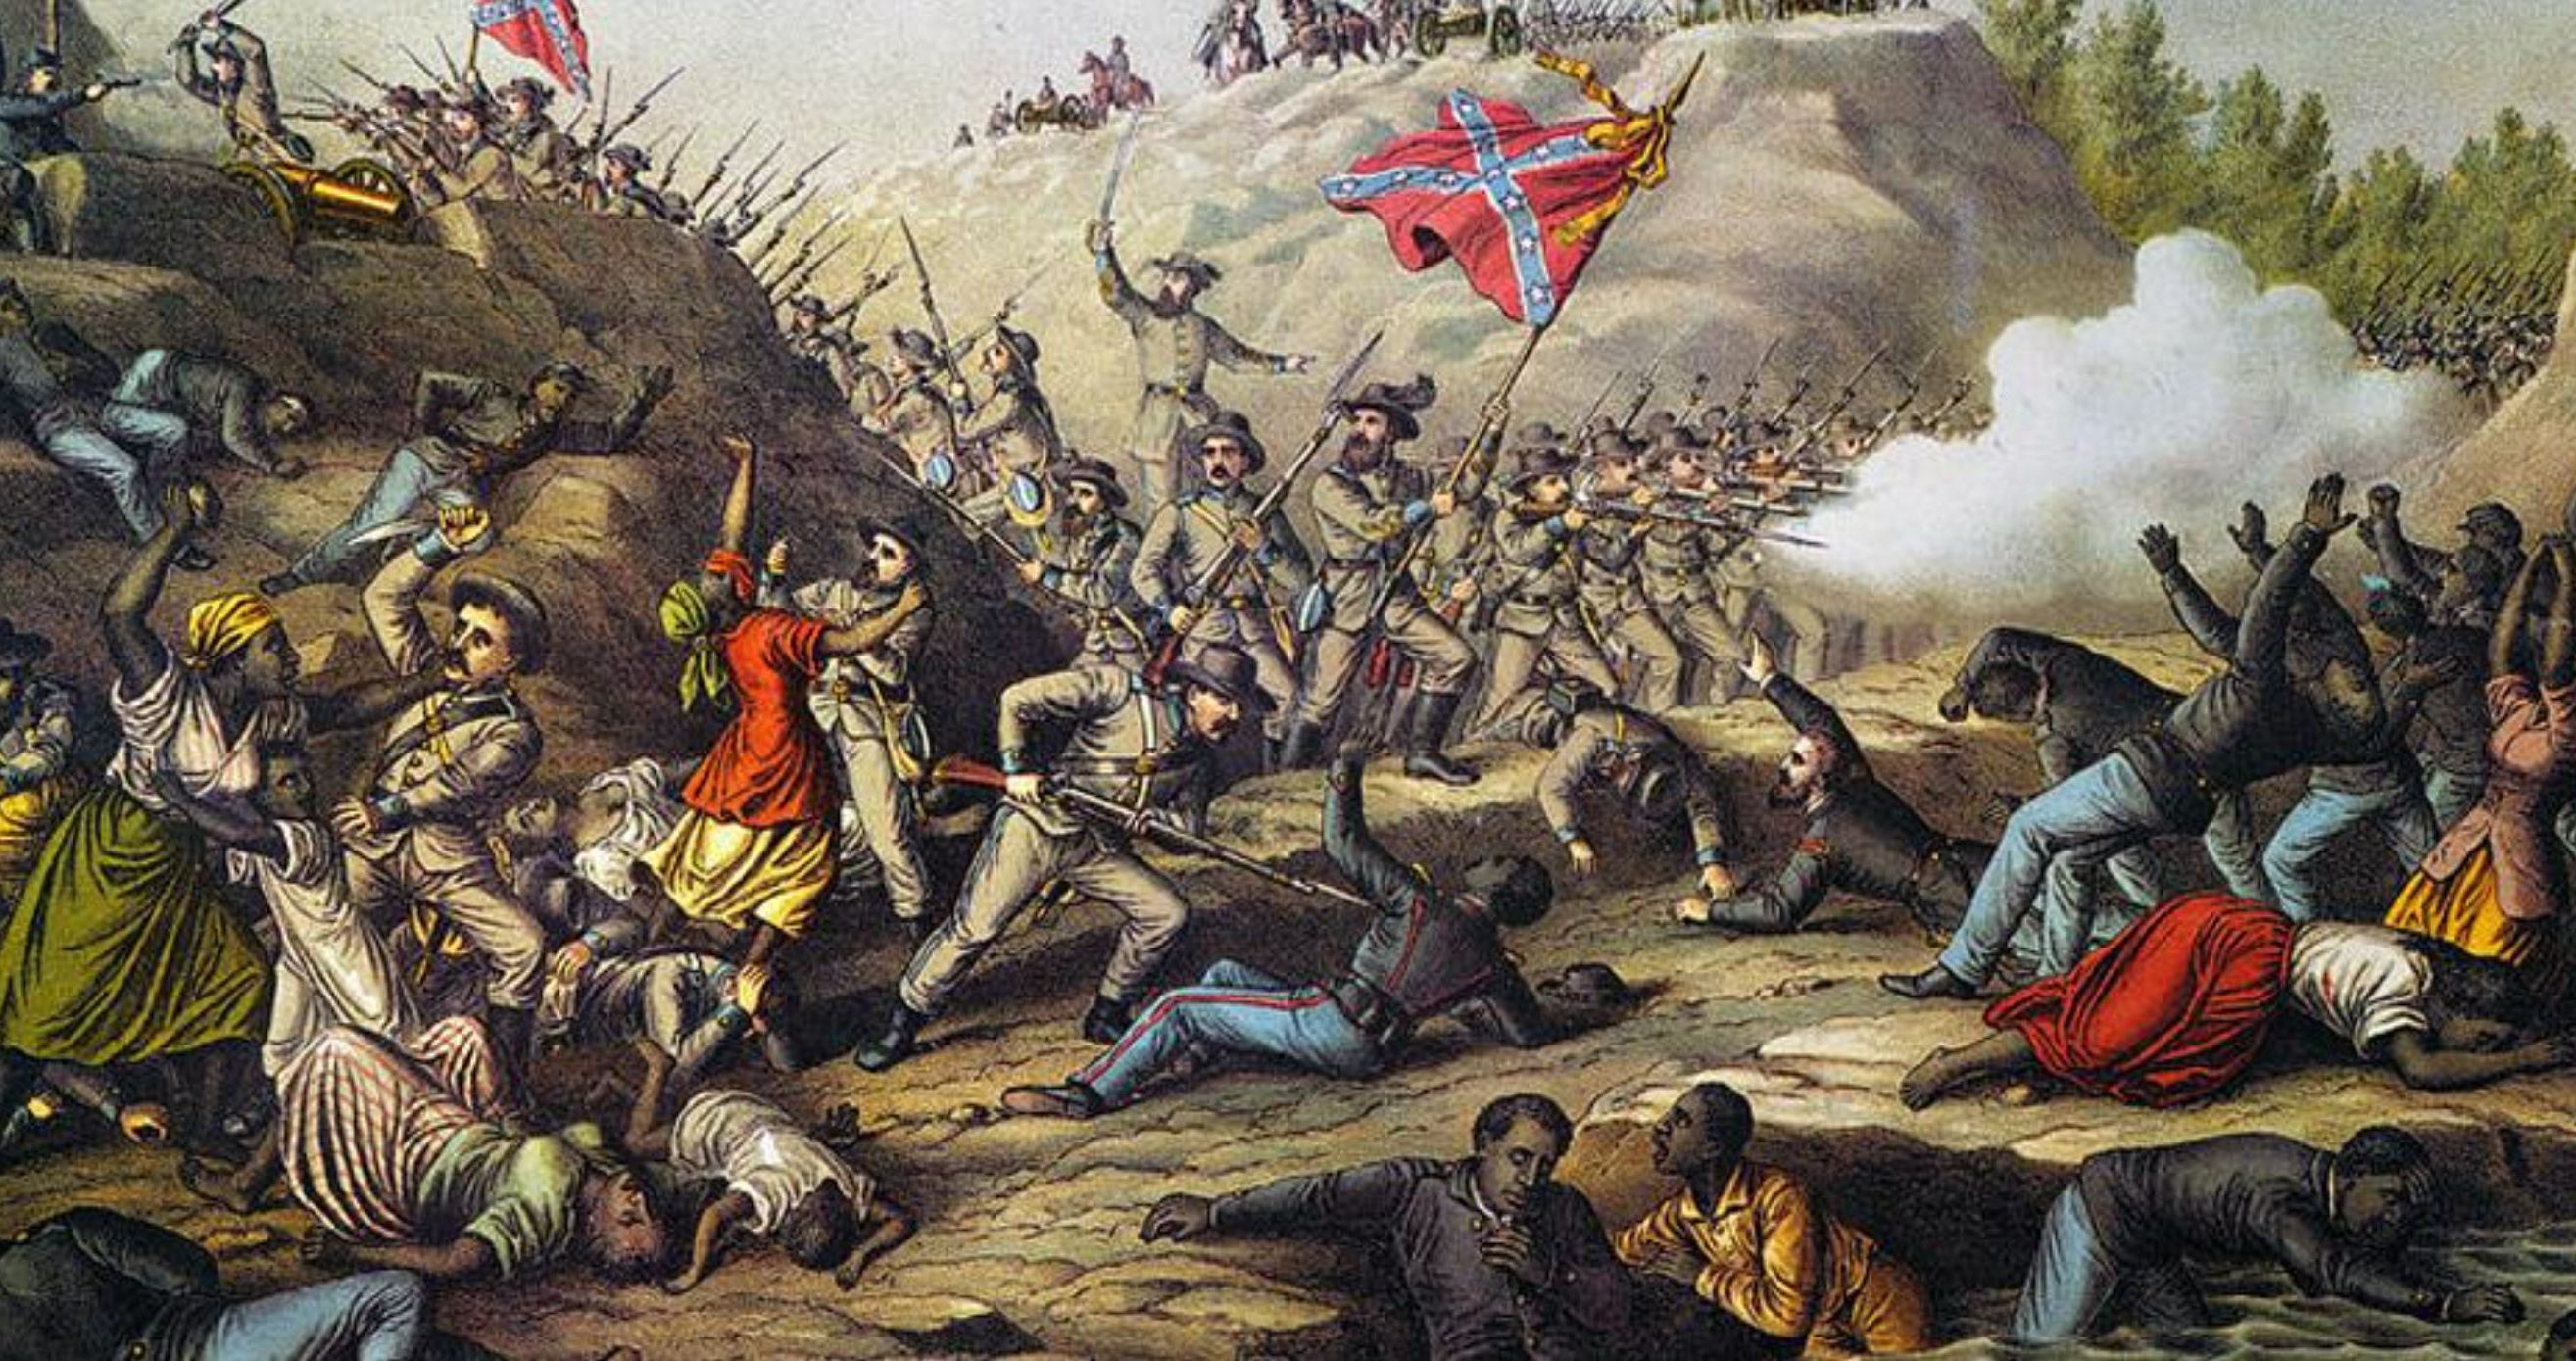 Forrest's brutal attack on the defenders of Fort Pillow was widely publicized in the Northern press including this colorized version of an illustration in Harper's.